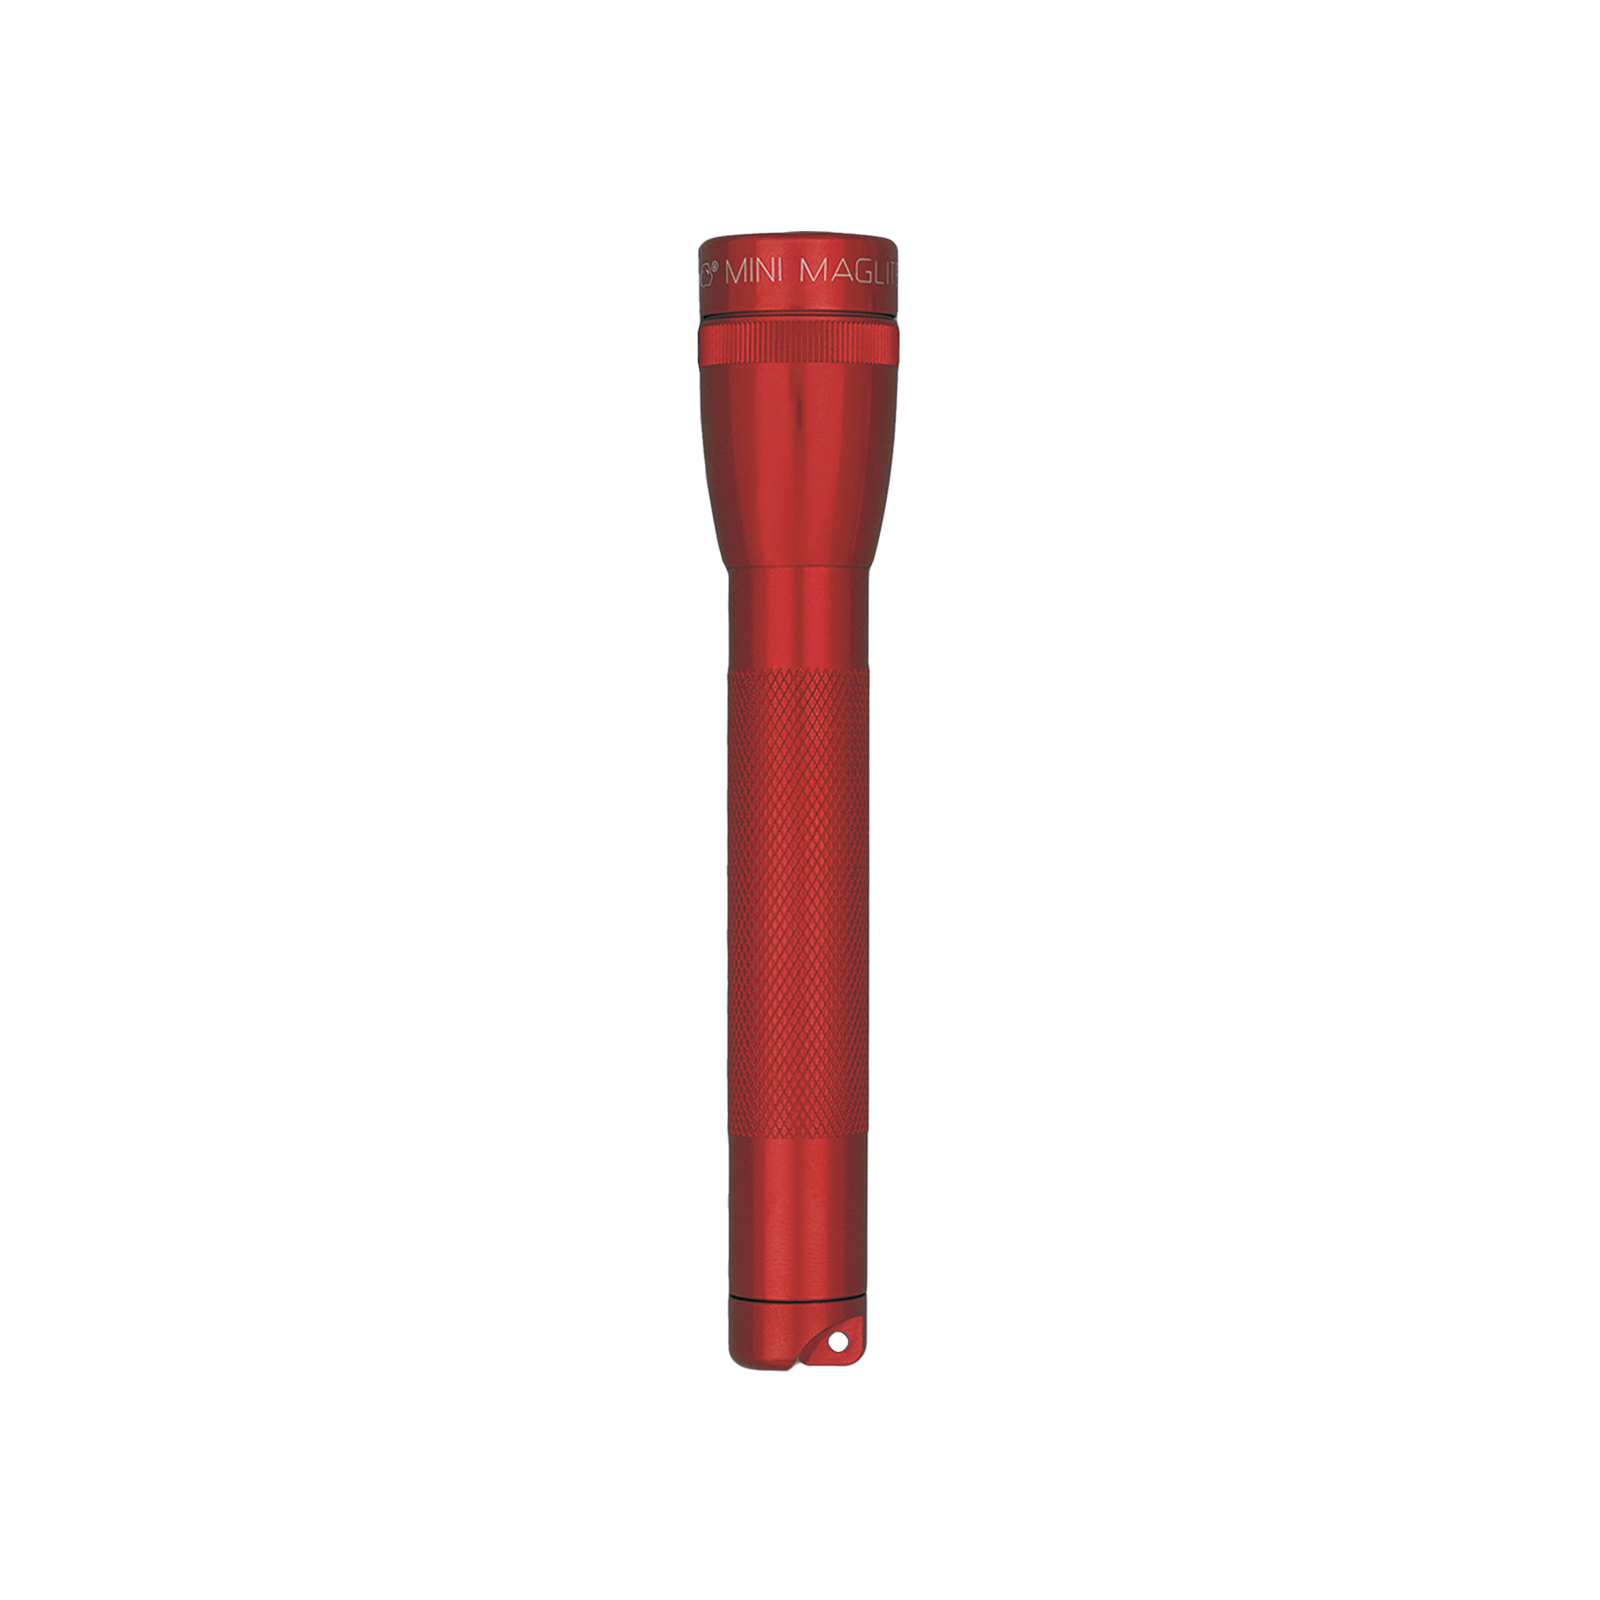 Maglite Xenon torch Mini, 2-Cell AA, Holster, red